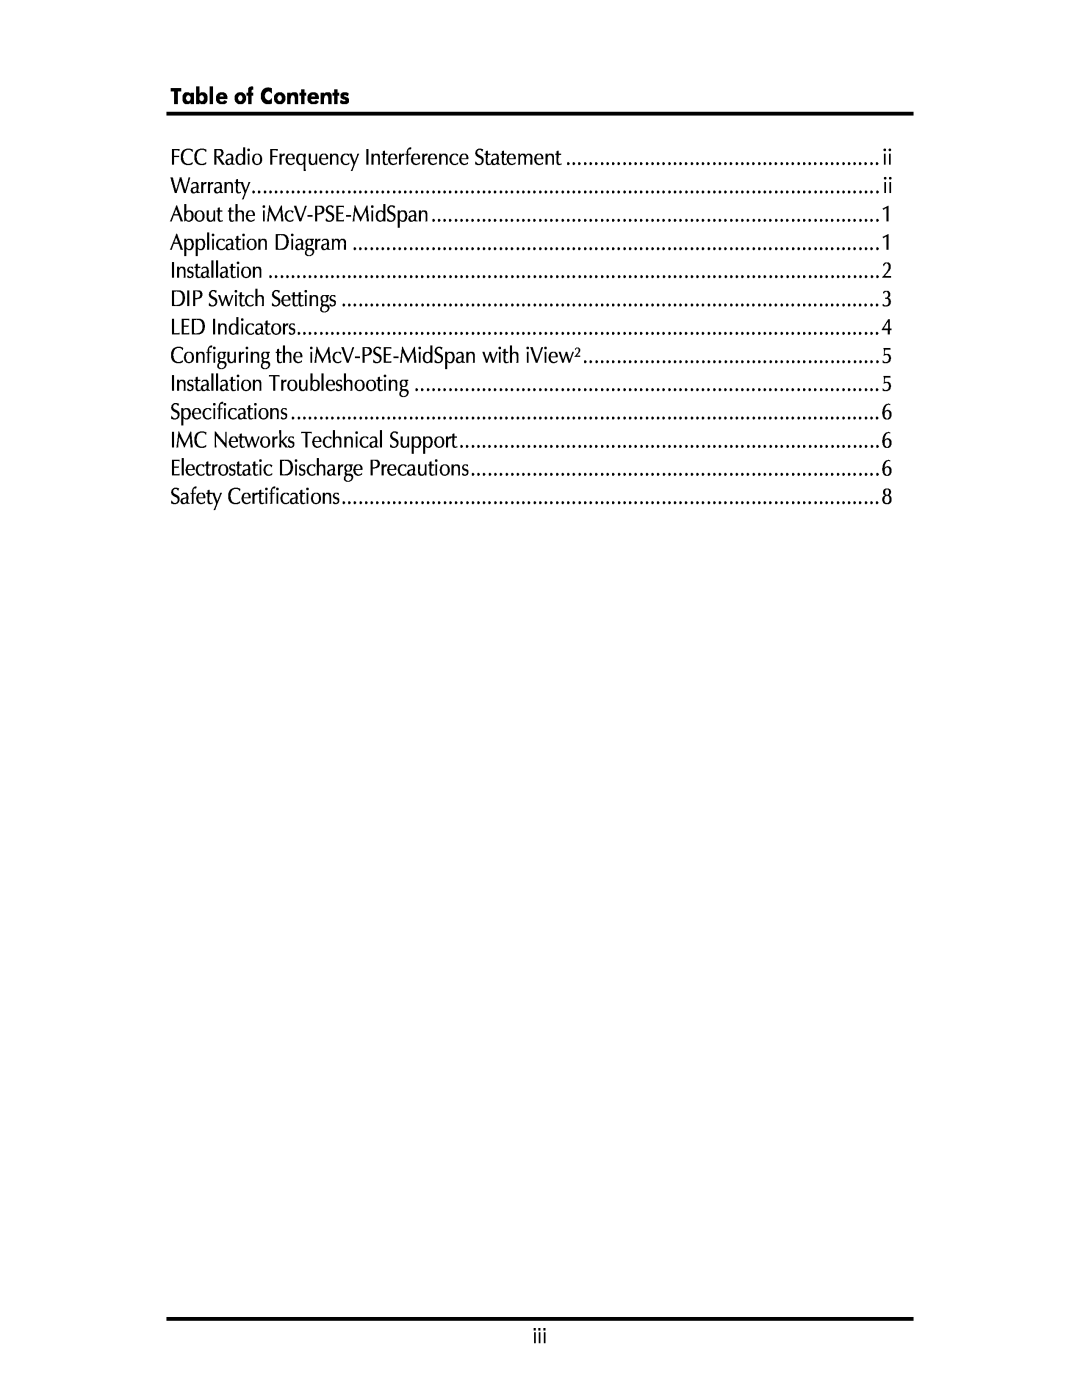 IMC Networks iMcV-PSE-MidSpan operation manual Table of Contents 